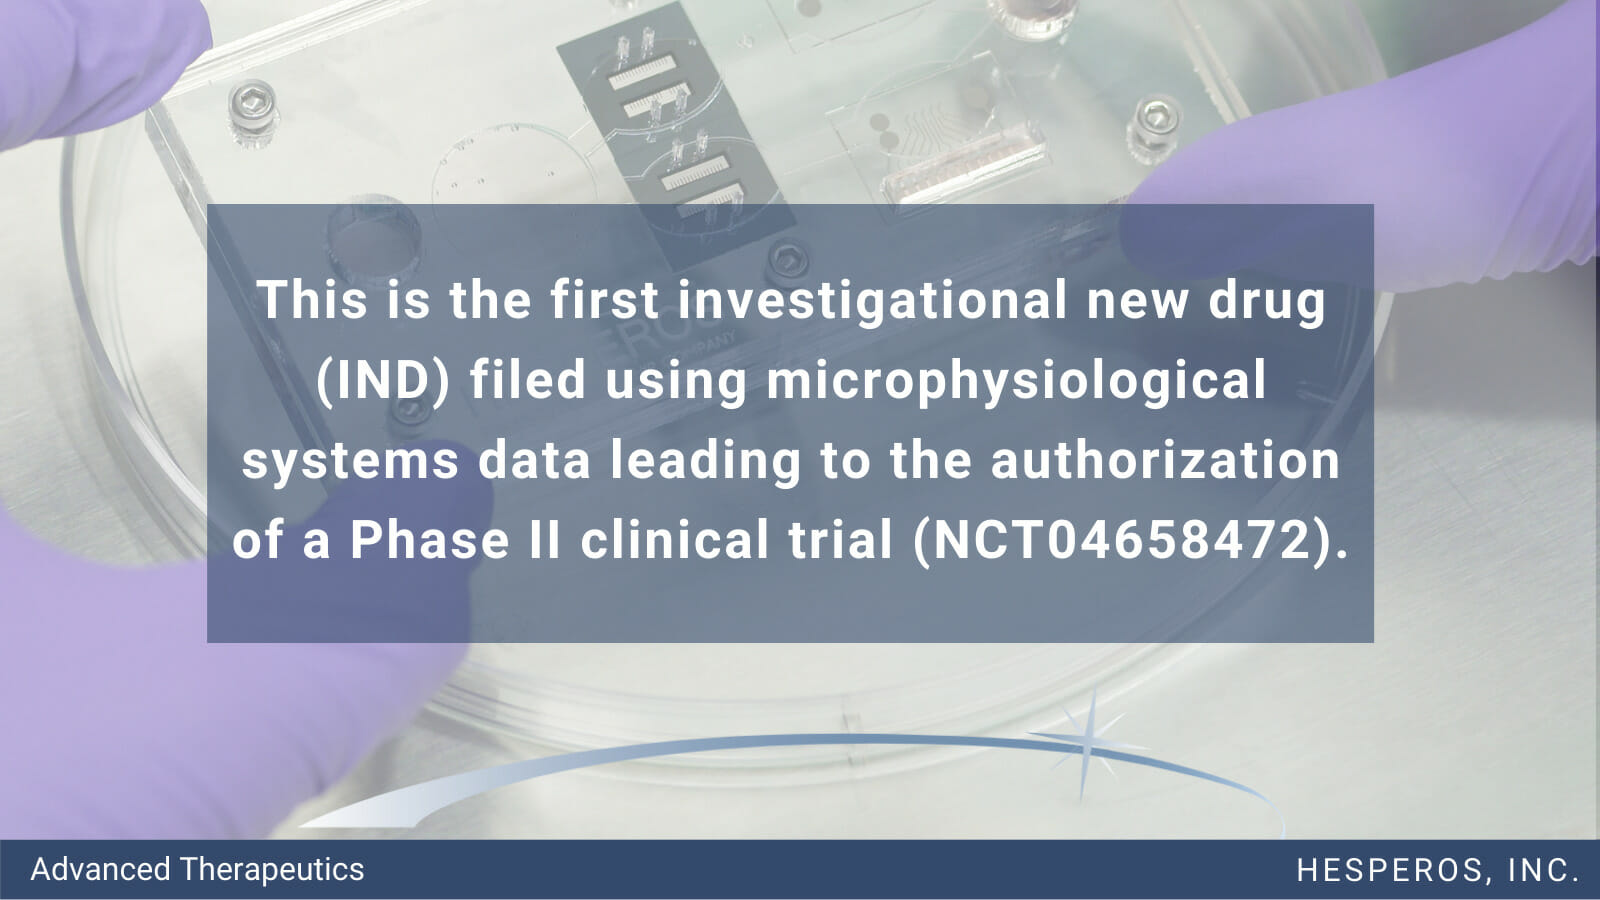 This is the first investigational new drug (IND) filed using microphysiological systems data leading to the authorization of a Phase II clinical trial (NCT04658472).